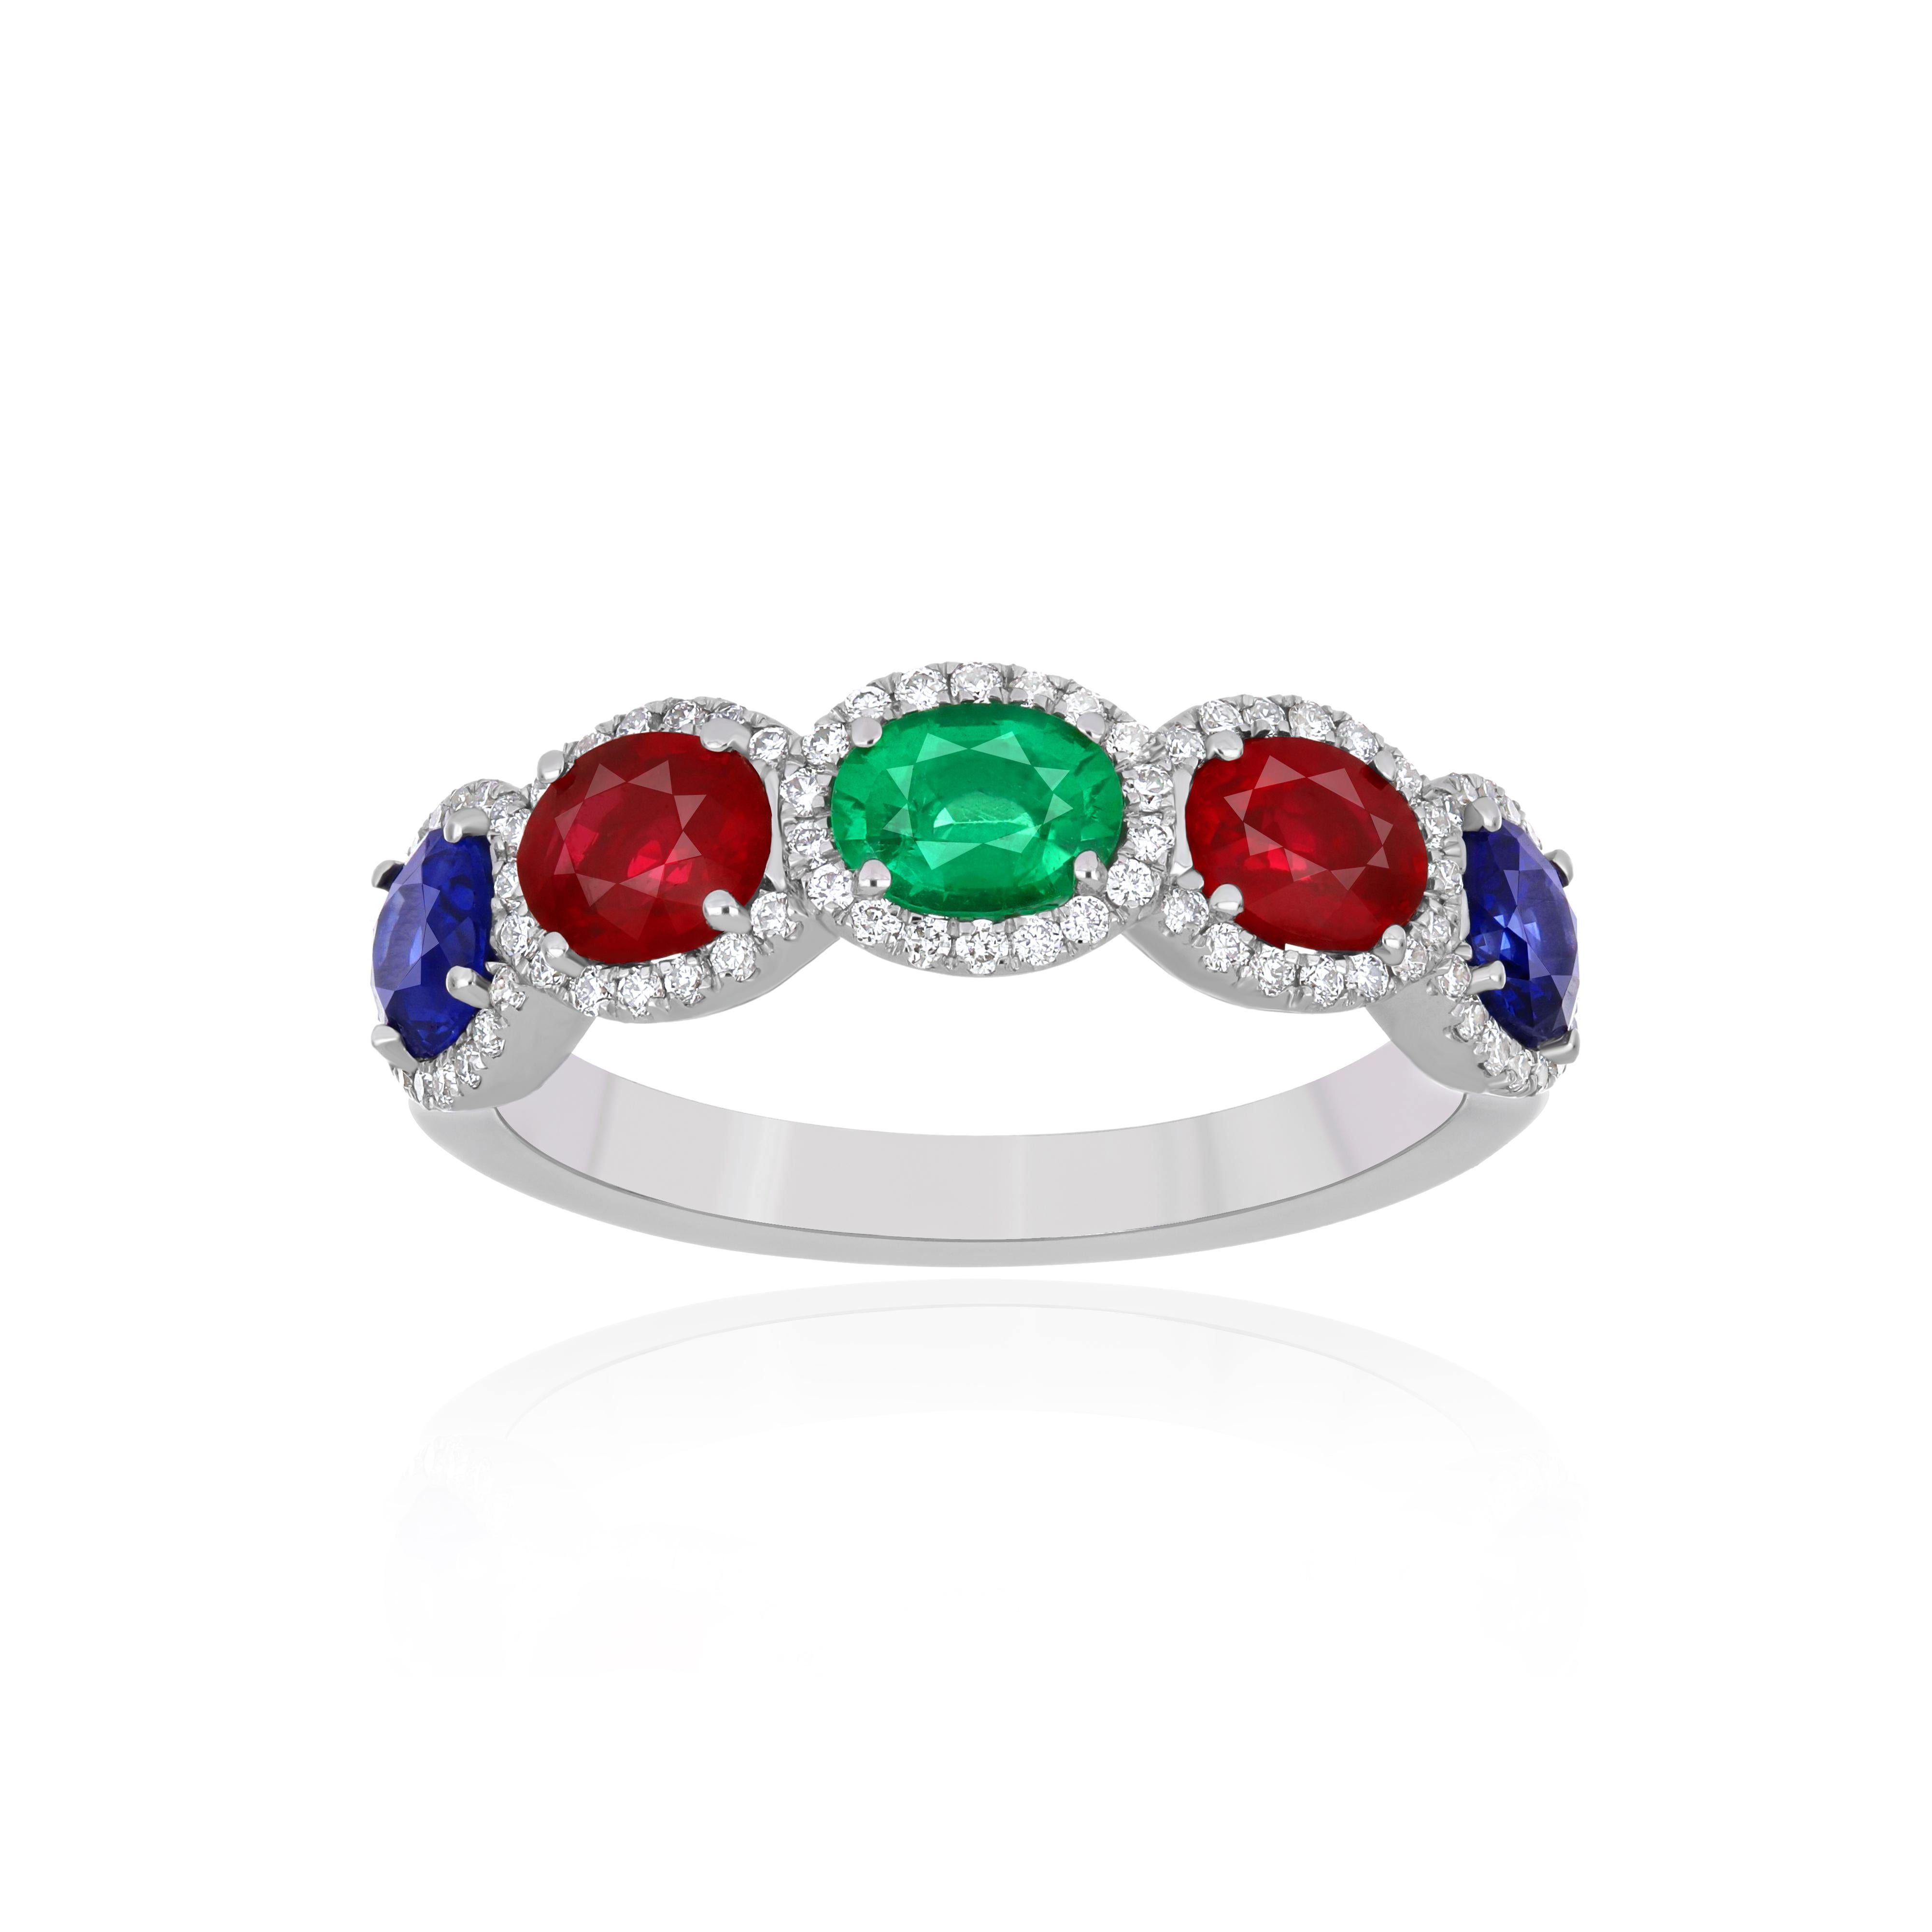 Elegant and exquisitely detailed 18 Karat White Gold Ring, center set with 0.98Cts .Oval Shape Ruby Mozambique, Blue Sapphire with 0.95Cts, Emerald With 0.27Cts and micro pave set Diamonds, weighing approx. 0.26Cts Beautifully Hand crafted in 18